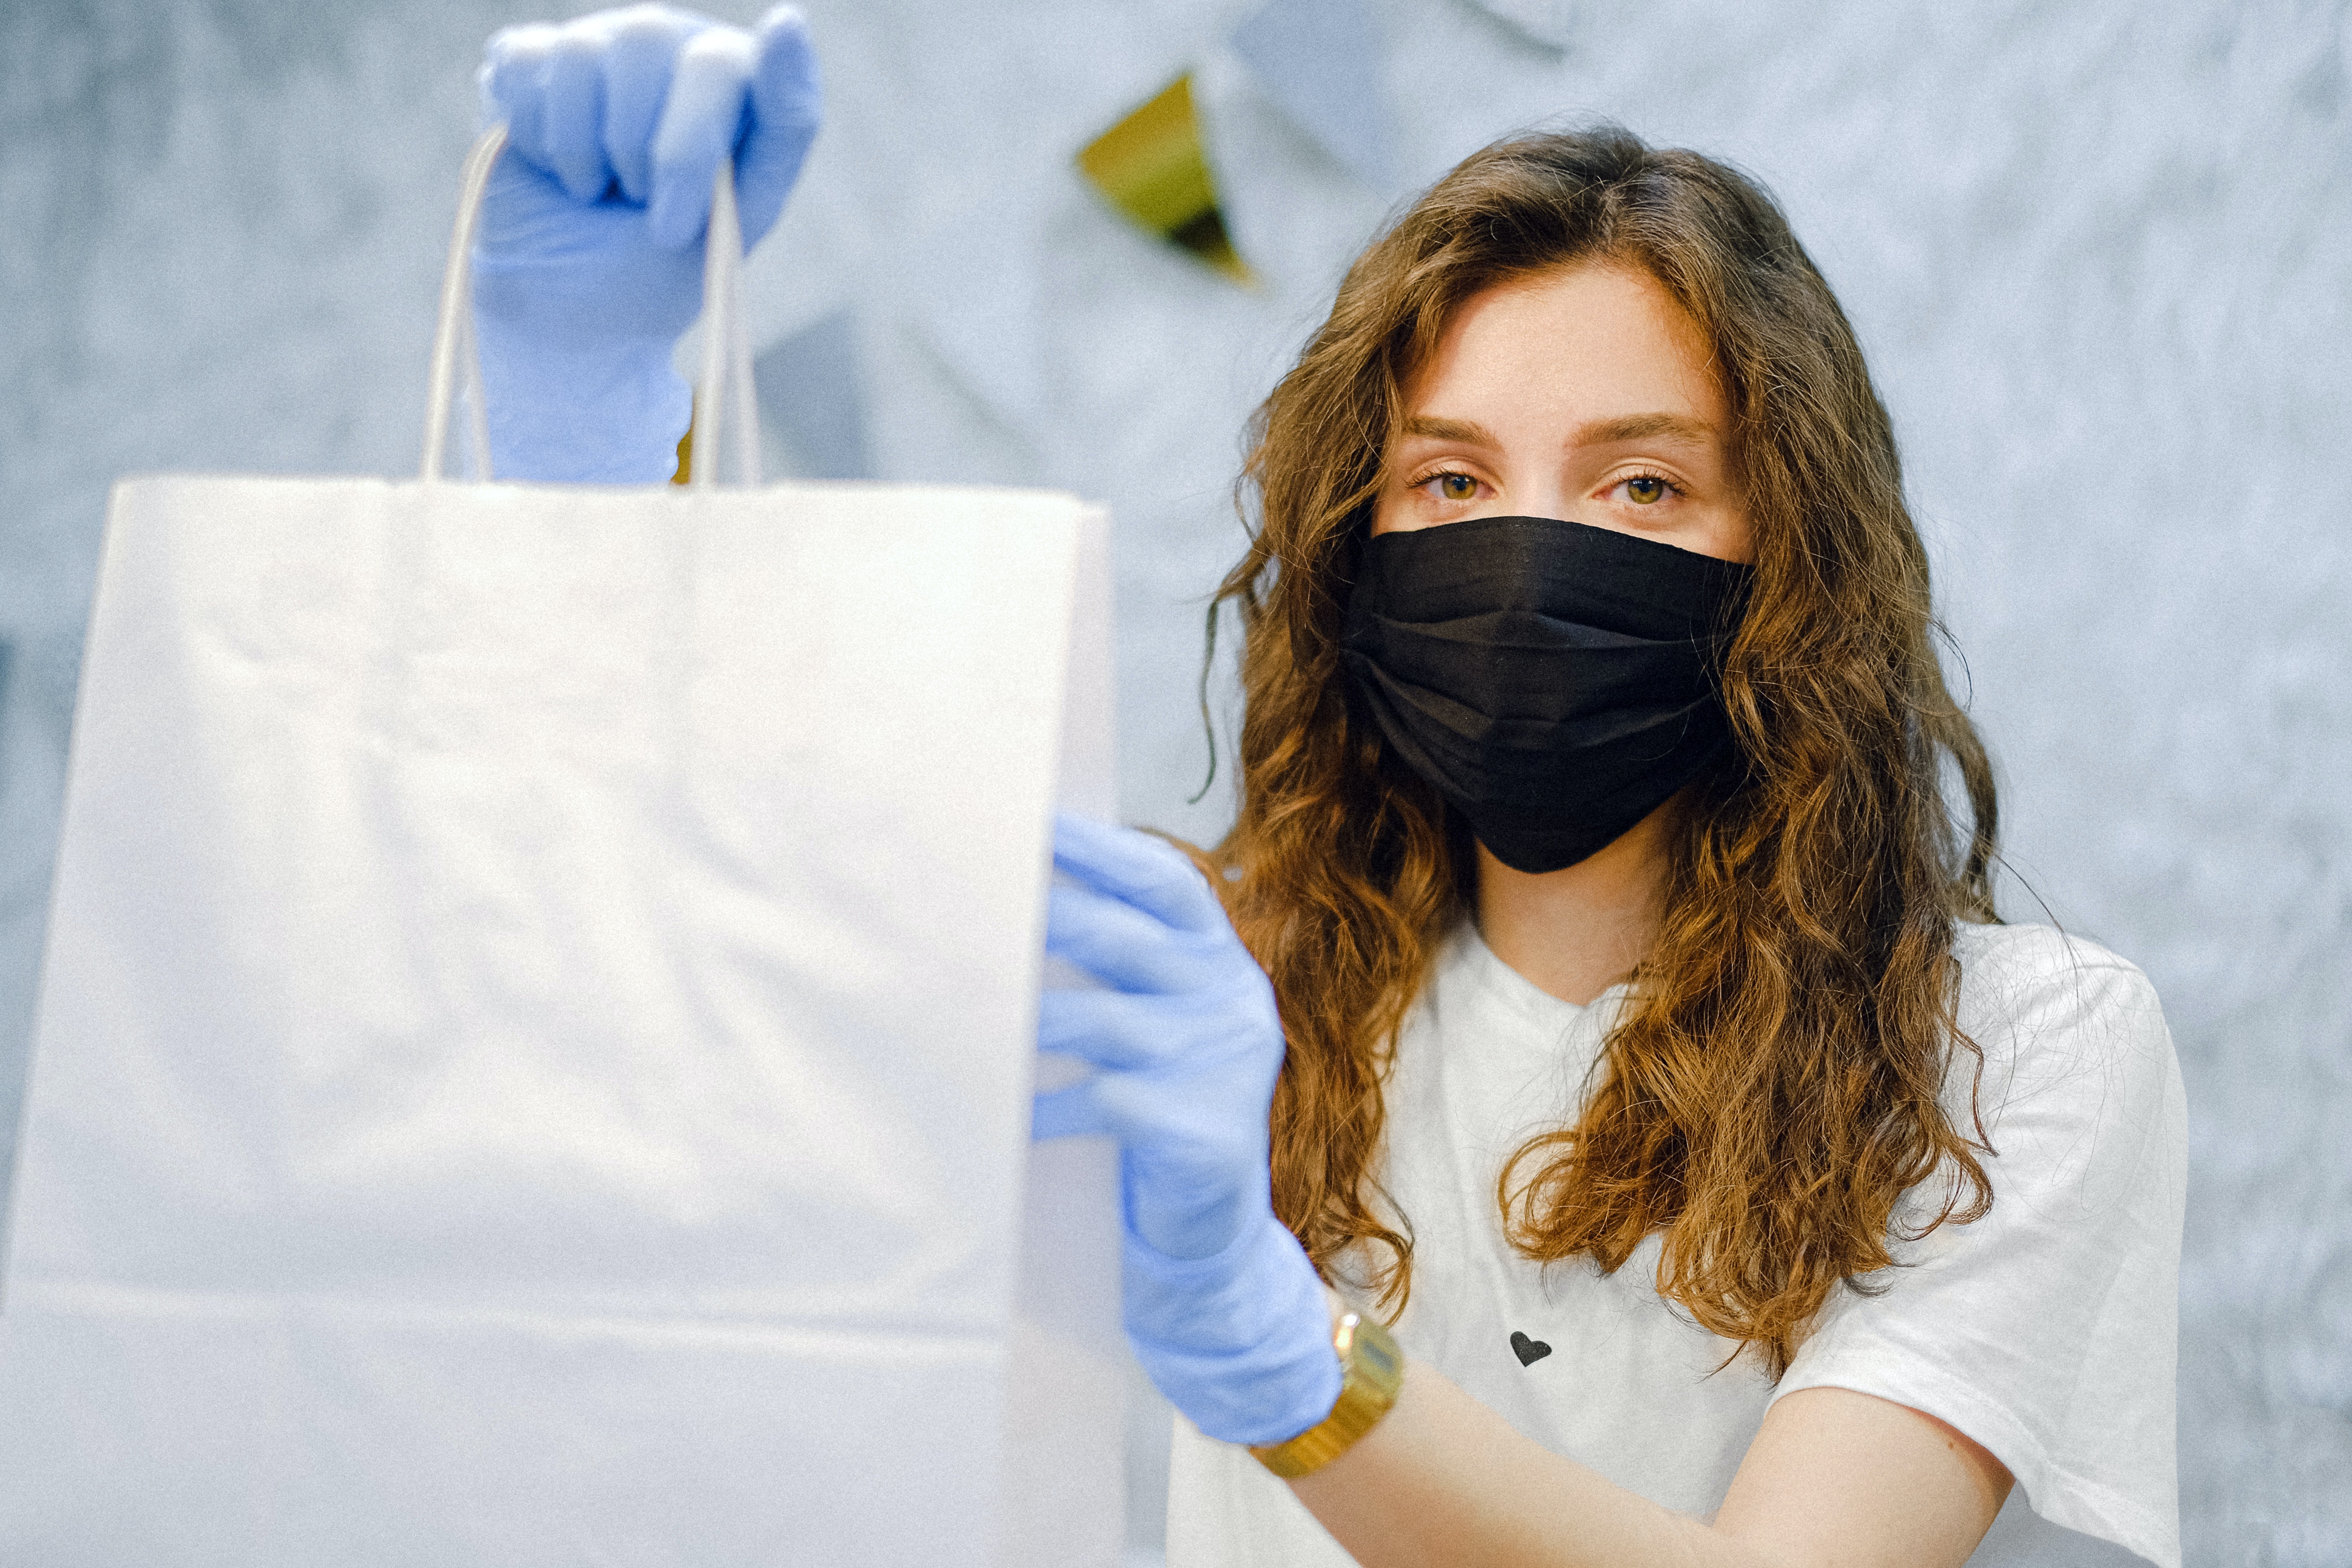 Woman in a black mask wearing gloves holding up a white shopping bag